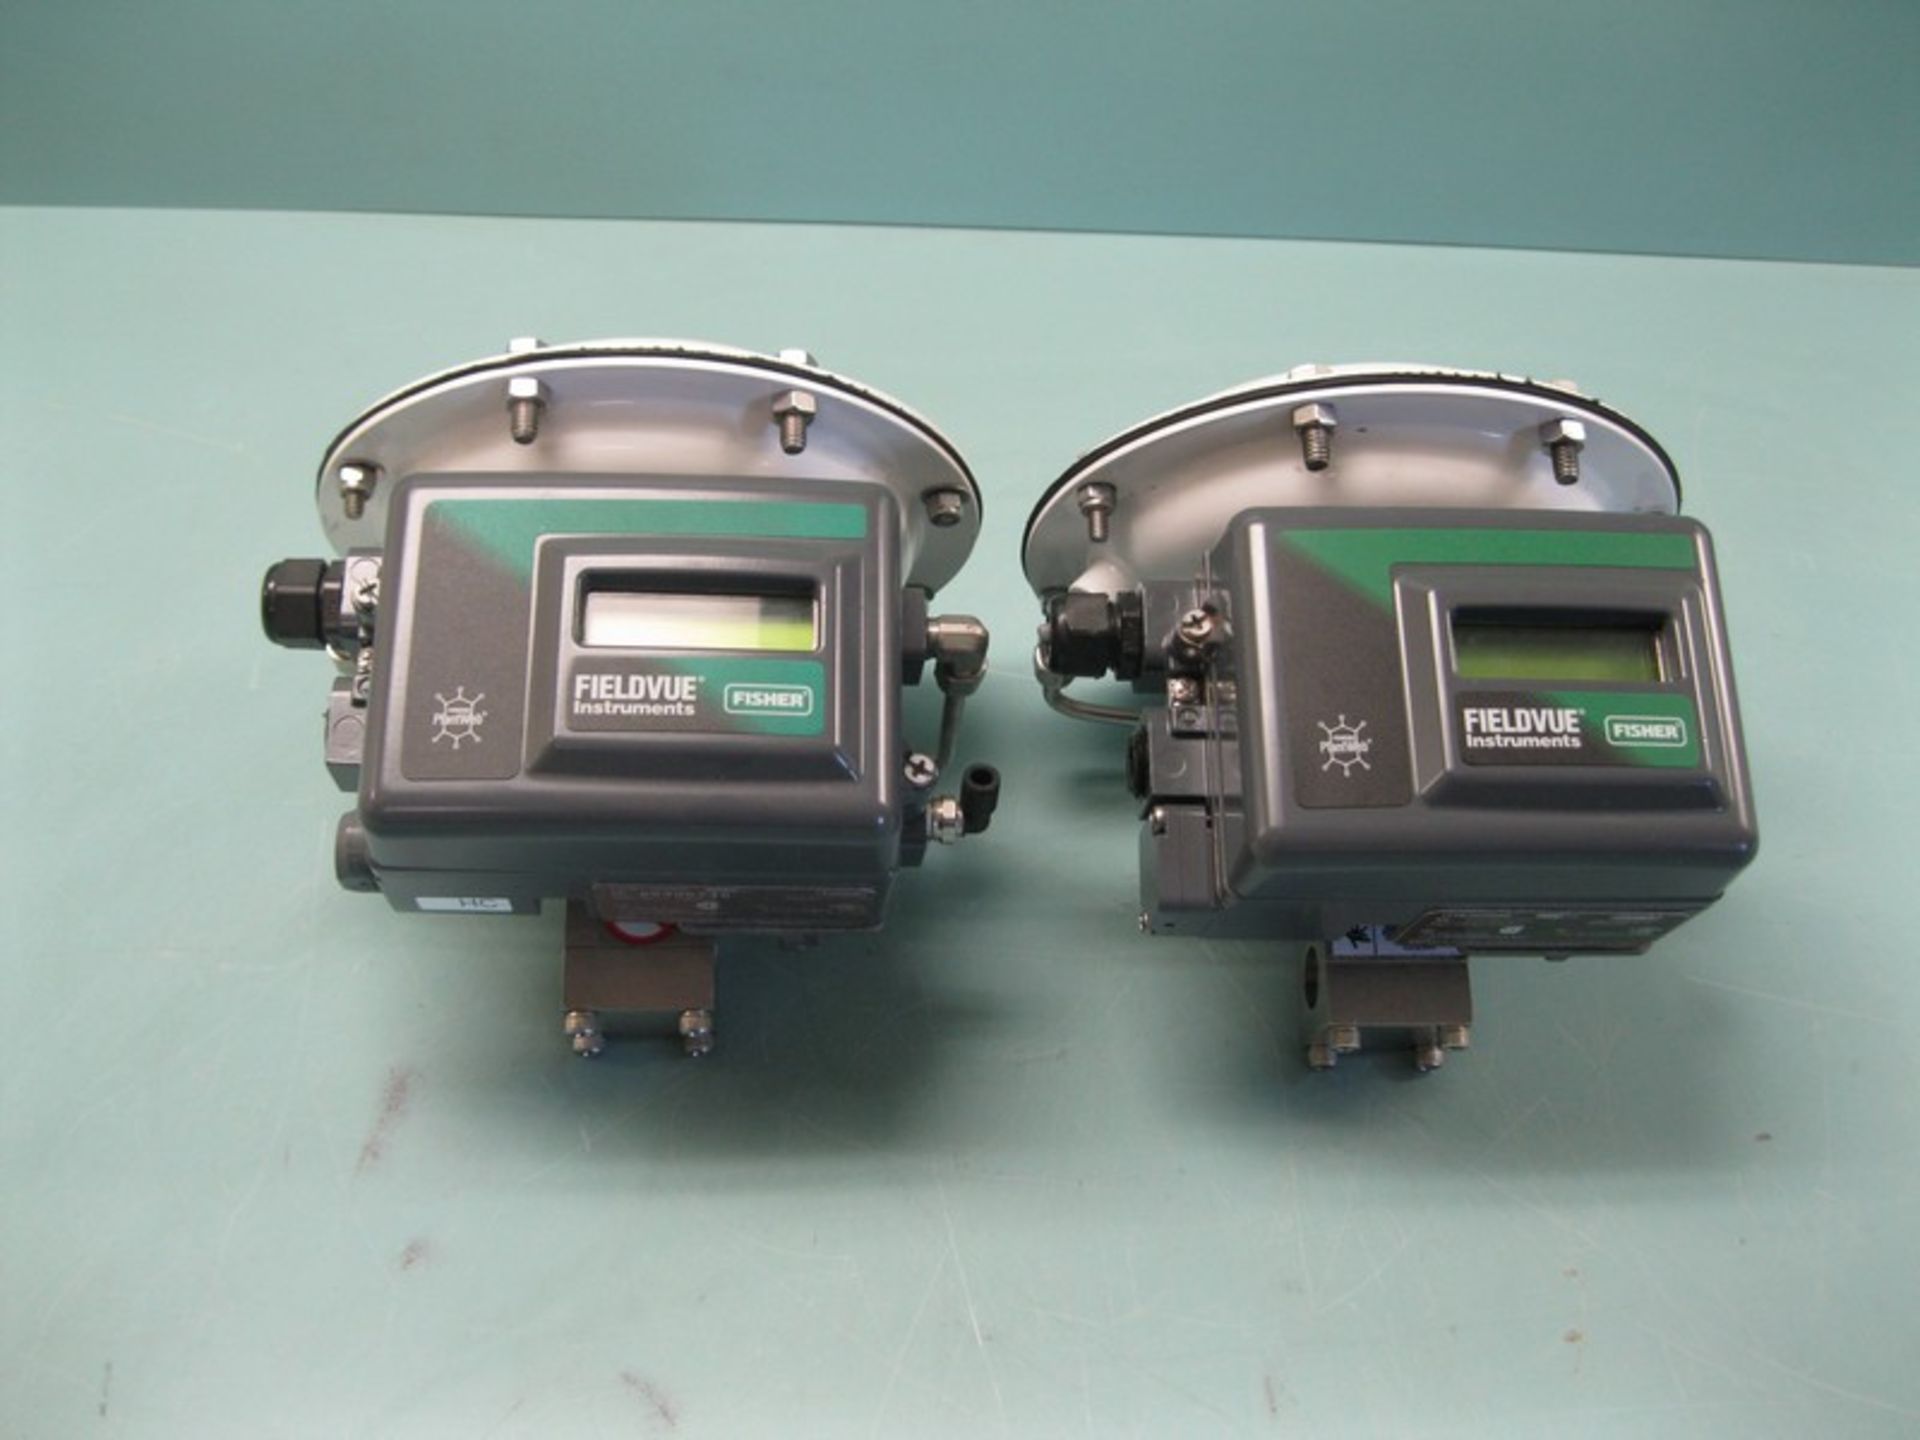 Lot of (2) 3/4" Fisher Baumann 85000 Sanitary Pinch Control Valve DVC2000 (Loading Fee $25) (Located